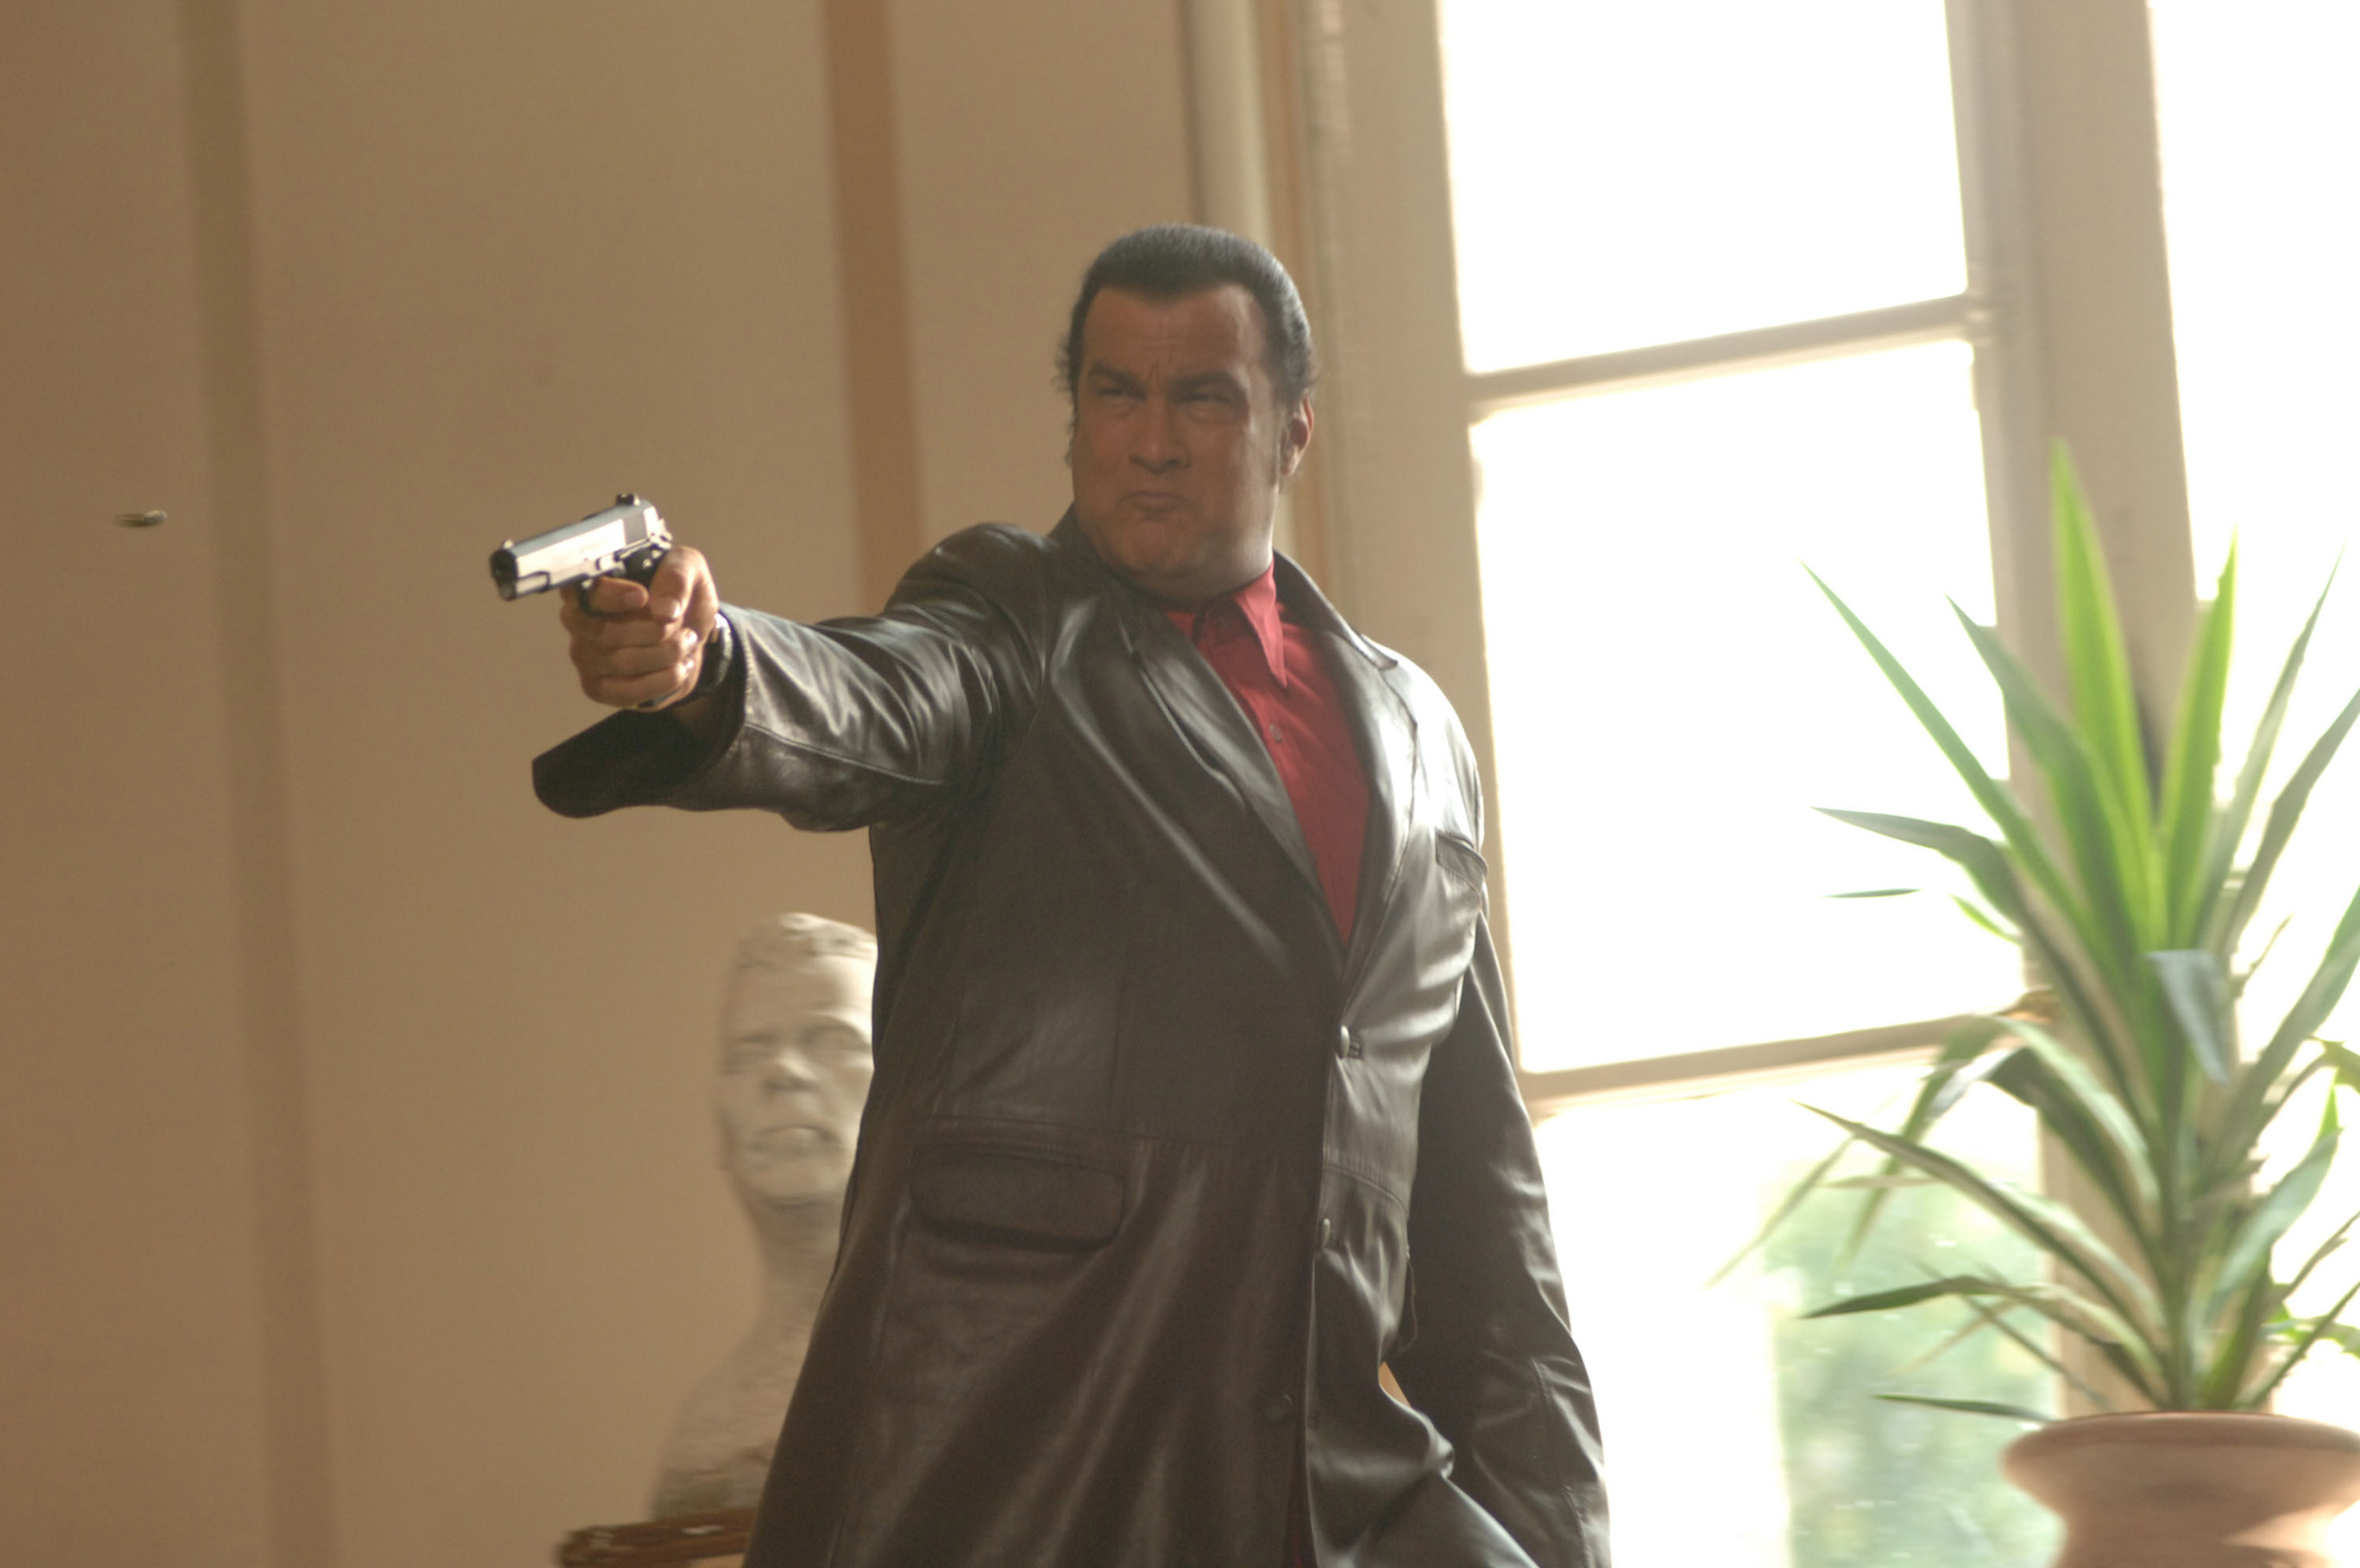 The man from the shadow. Shadow man 2006 Steven Seagal.